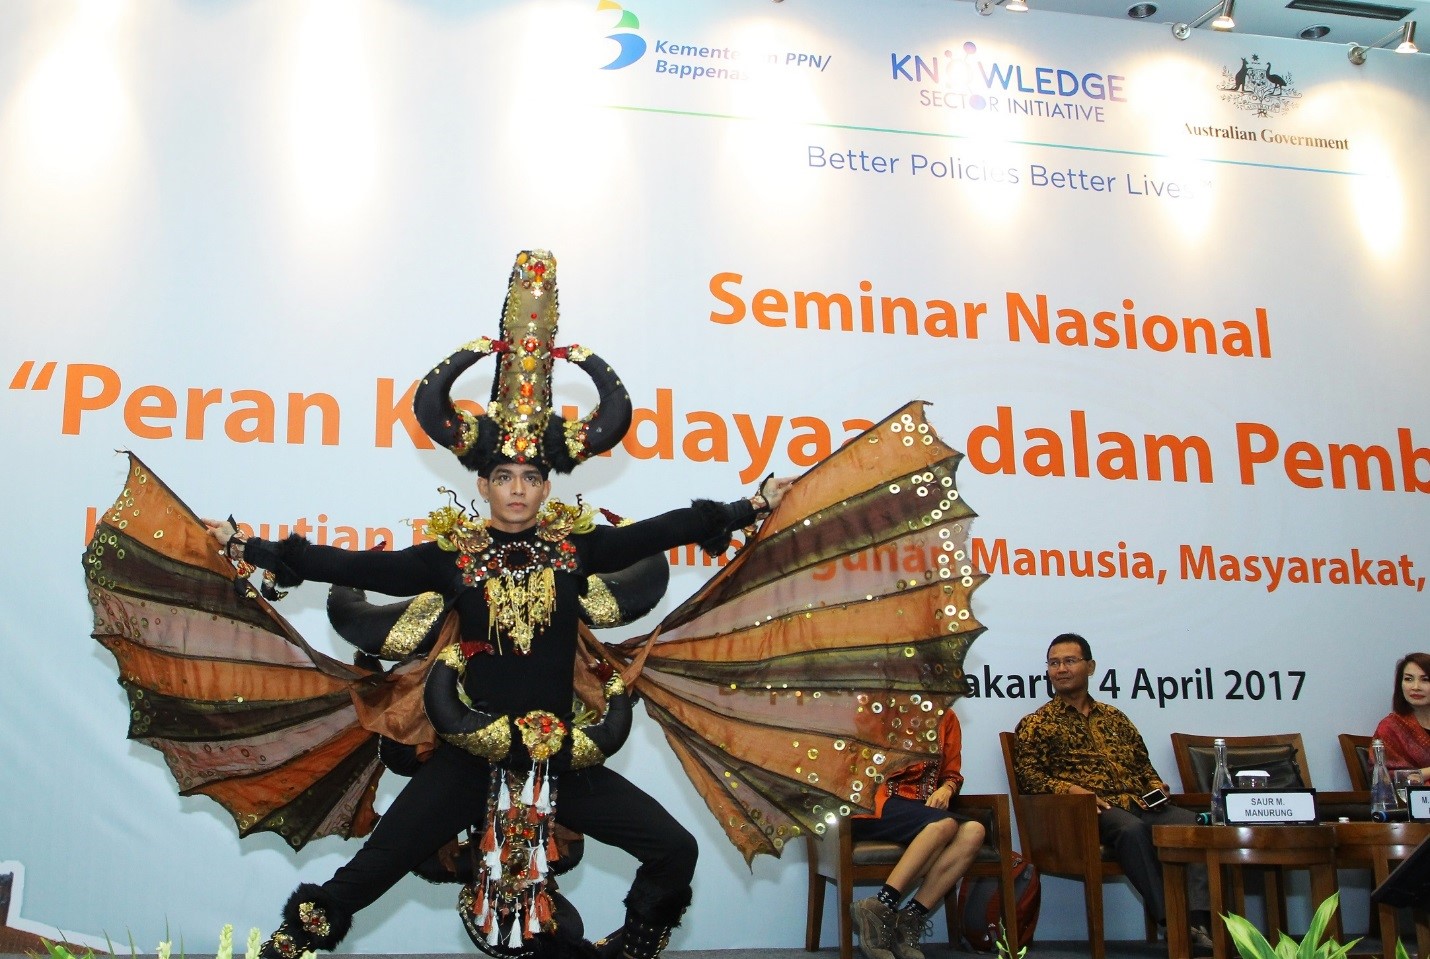 Culture as a Driver for National Development